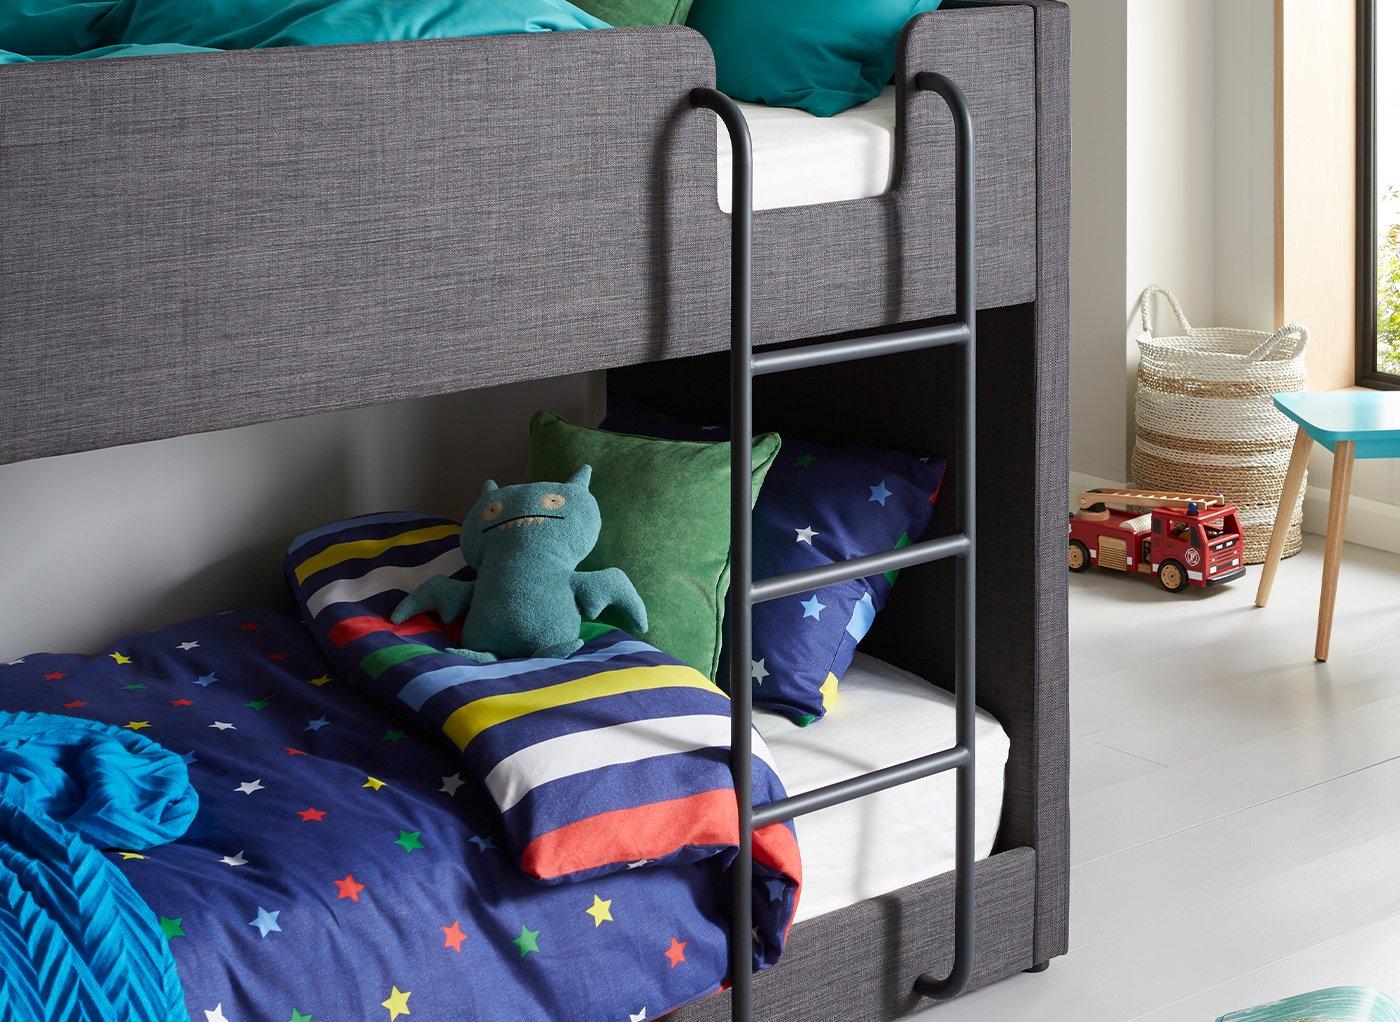 triple bunk bed with trundle